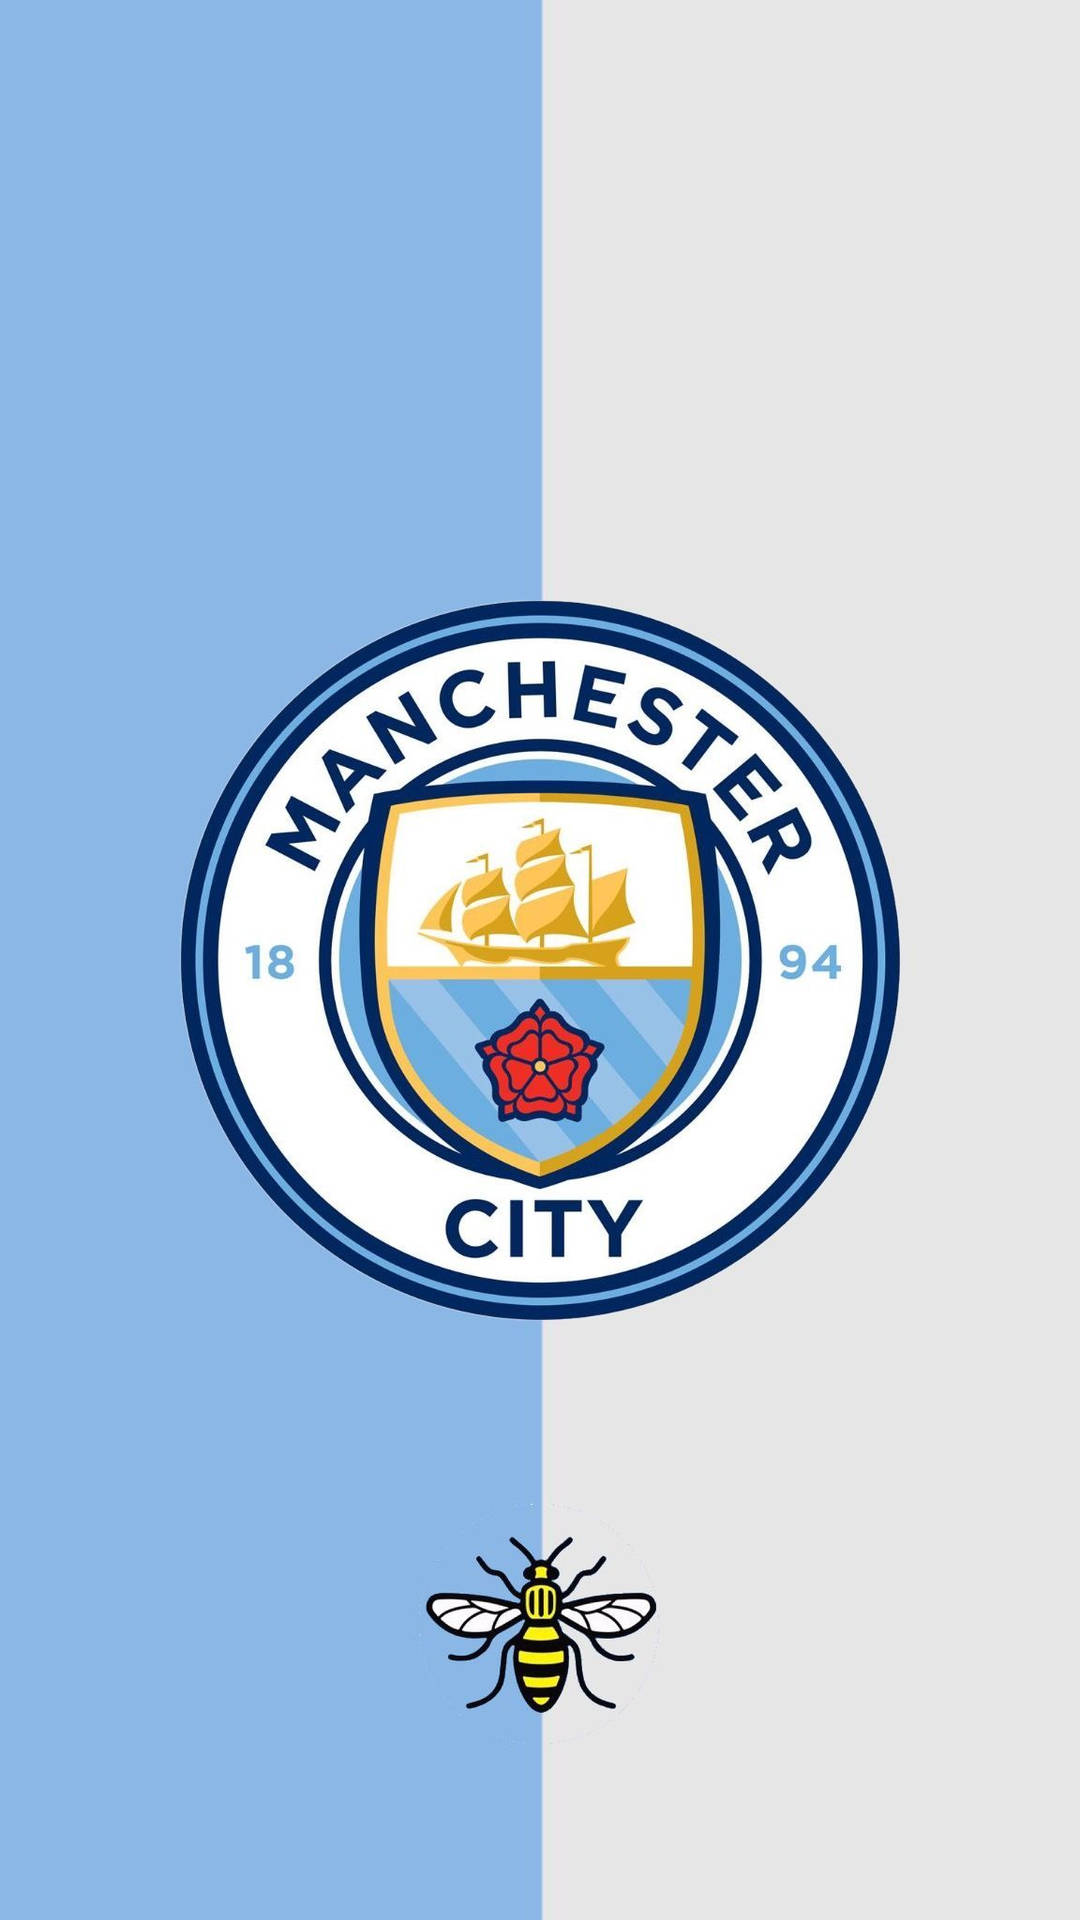 Manchester City Logo With Worker Bee Symbol Background